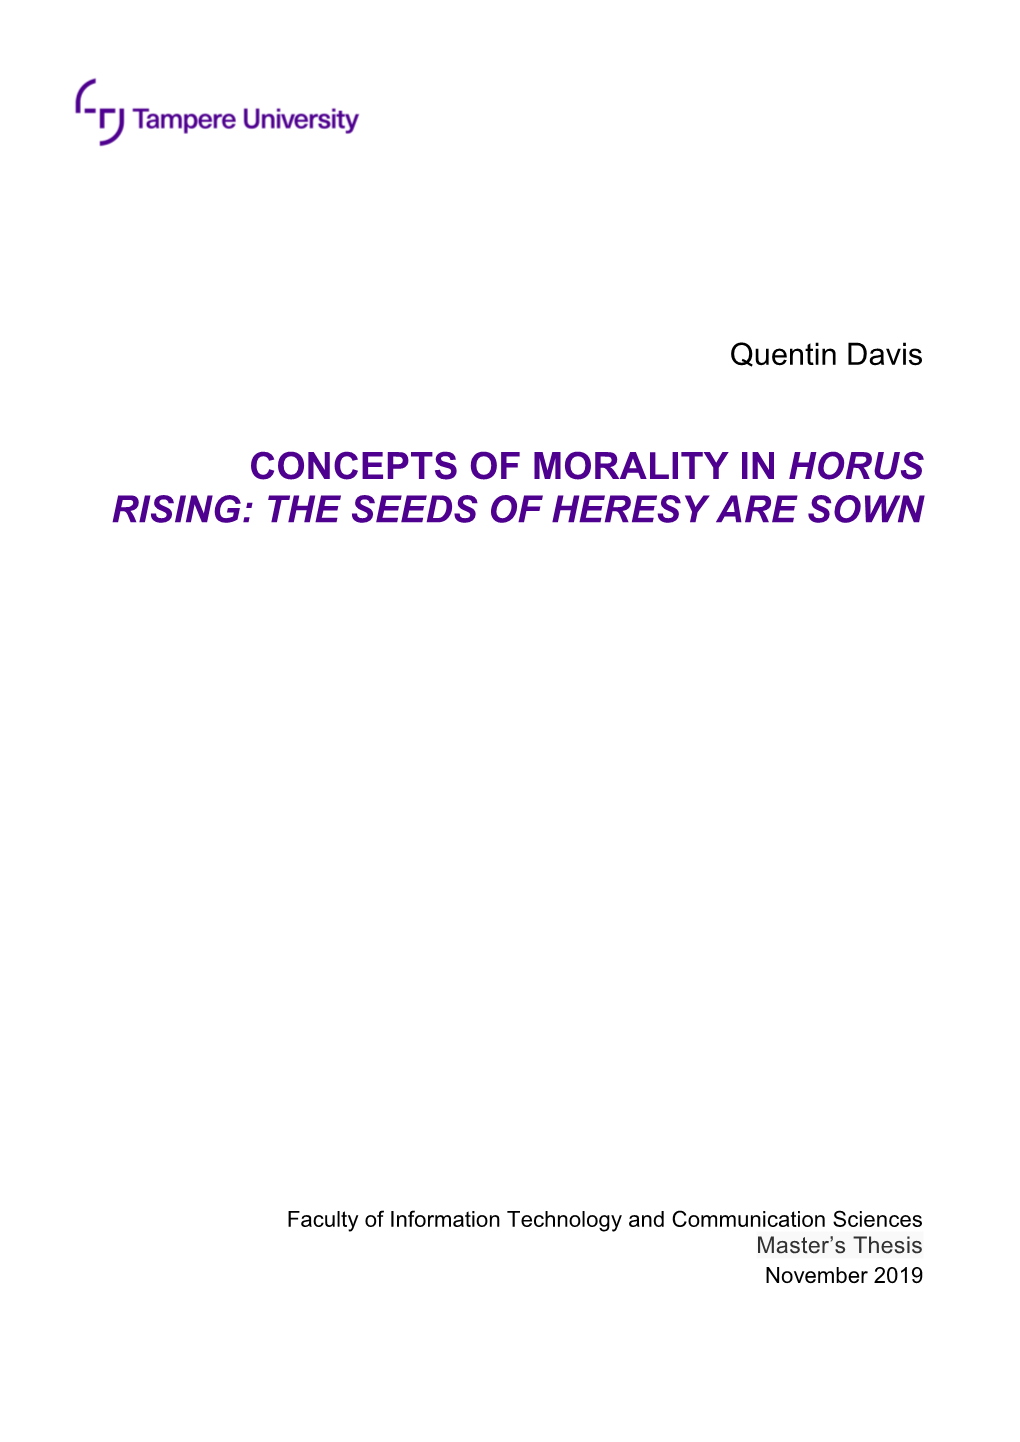 Concepts of Morality in Horus Rising: the Seeds of Heresy Are Sown